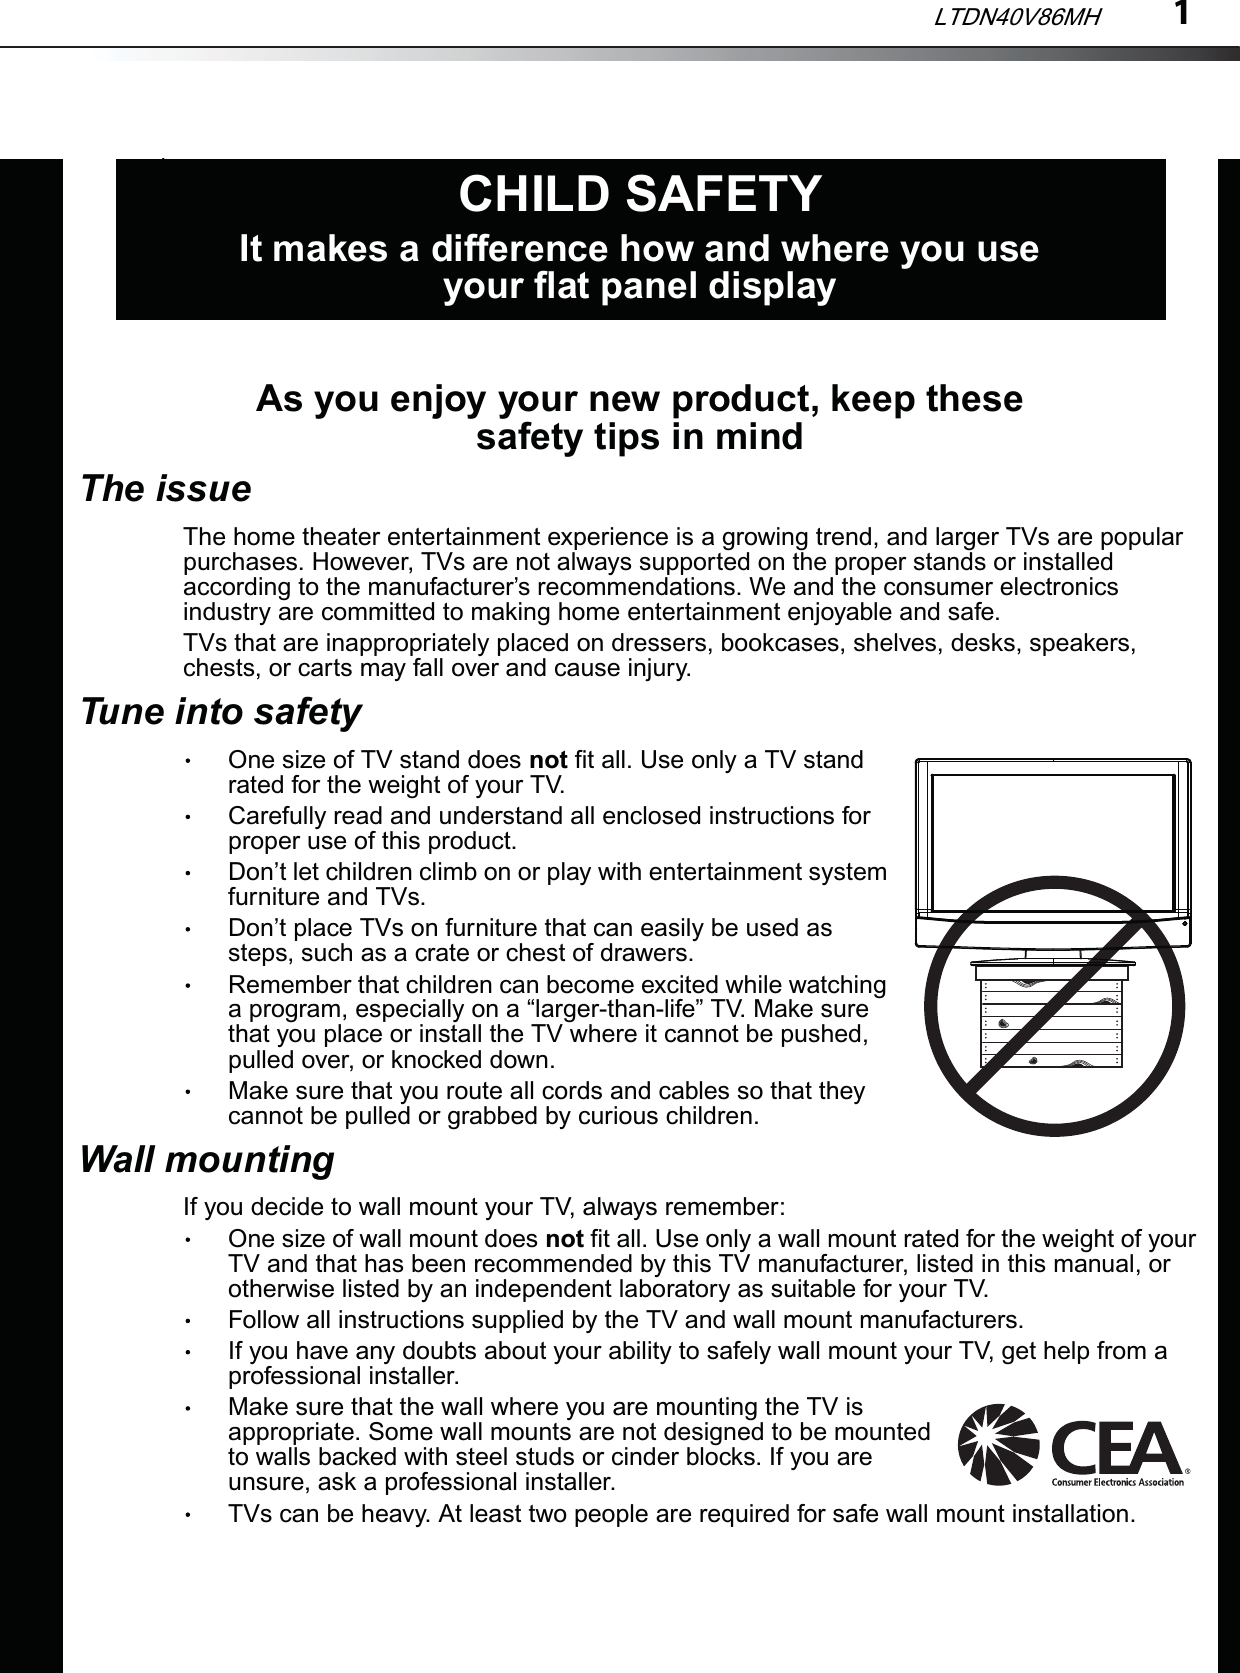 1As you enjoy your new product, keep these safety tips in mindThe issueThe home theater entertainment experience is a growing trend, and larger TVs are popular purchases. However, TVs are not always supported on the proper stands or installed according to the manufacturer’s recommendations. We and the consumer electronics industry are committed to making home entertainment enjoyable and safe.TVs that are inappropriately placed on dressers, bookcases, shelves, desks, speakers, chests, or carts may fall over and cause injury.Tune into safetyOne size of TV stand does not fit all. Use only a TV stand rated for the weight of your TV.Carefully read and understand all enclosed instructions for proper use of this product.Don’t let children climb on or play with entertainment system furniture and TVs.Don’t place TVs on furniture that can easily be used as steps, such as a crate or chest of drawers.Remember that children can become excited while watching a program, especially on a “larger-than-life” TV. Make sure that you place or install the TV where it cannot be pushed, pulled over, or knocked down.Make sure that you route all cords and cables so that they cannot be pulled or grabbed by curious children.Wall mountingIf you decide to wall mount your TV, always remember:One size of wall mount does not fit all. Use only a wall mount rated for the weight of your TV and that has been recommended by this TV manufacturer, listed in this manual, or otherwise listed by an independent laboratory as suitable for your TV.Follow all instructions supplied by the TV and wall mount manufacturers.If you have any doubts about your ability to safely wall mount your TV, get help from a professional installer.Make sure that the wall where you are mounting the TV is appropriate. Some wall mounts are not designed to be mounted to walls backed with steel studs or cinder blocks. If you are unsure, ask a professional installer.TVs can be heavy. At least two people are required for safe wall mount installation.fCHILD SAFETYIt makes a difference how and where you use your flat panel displayLTDN40V86MH